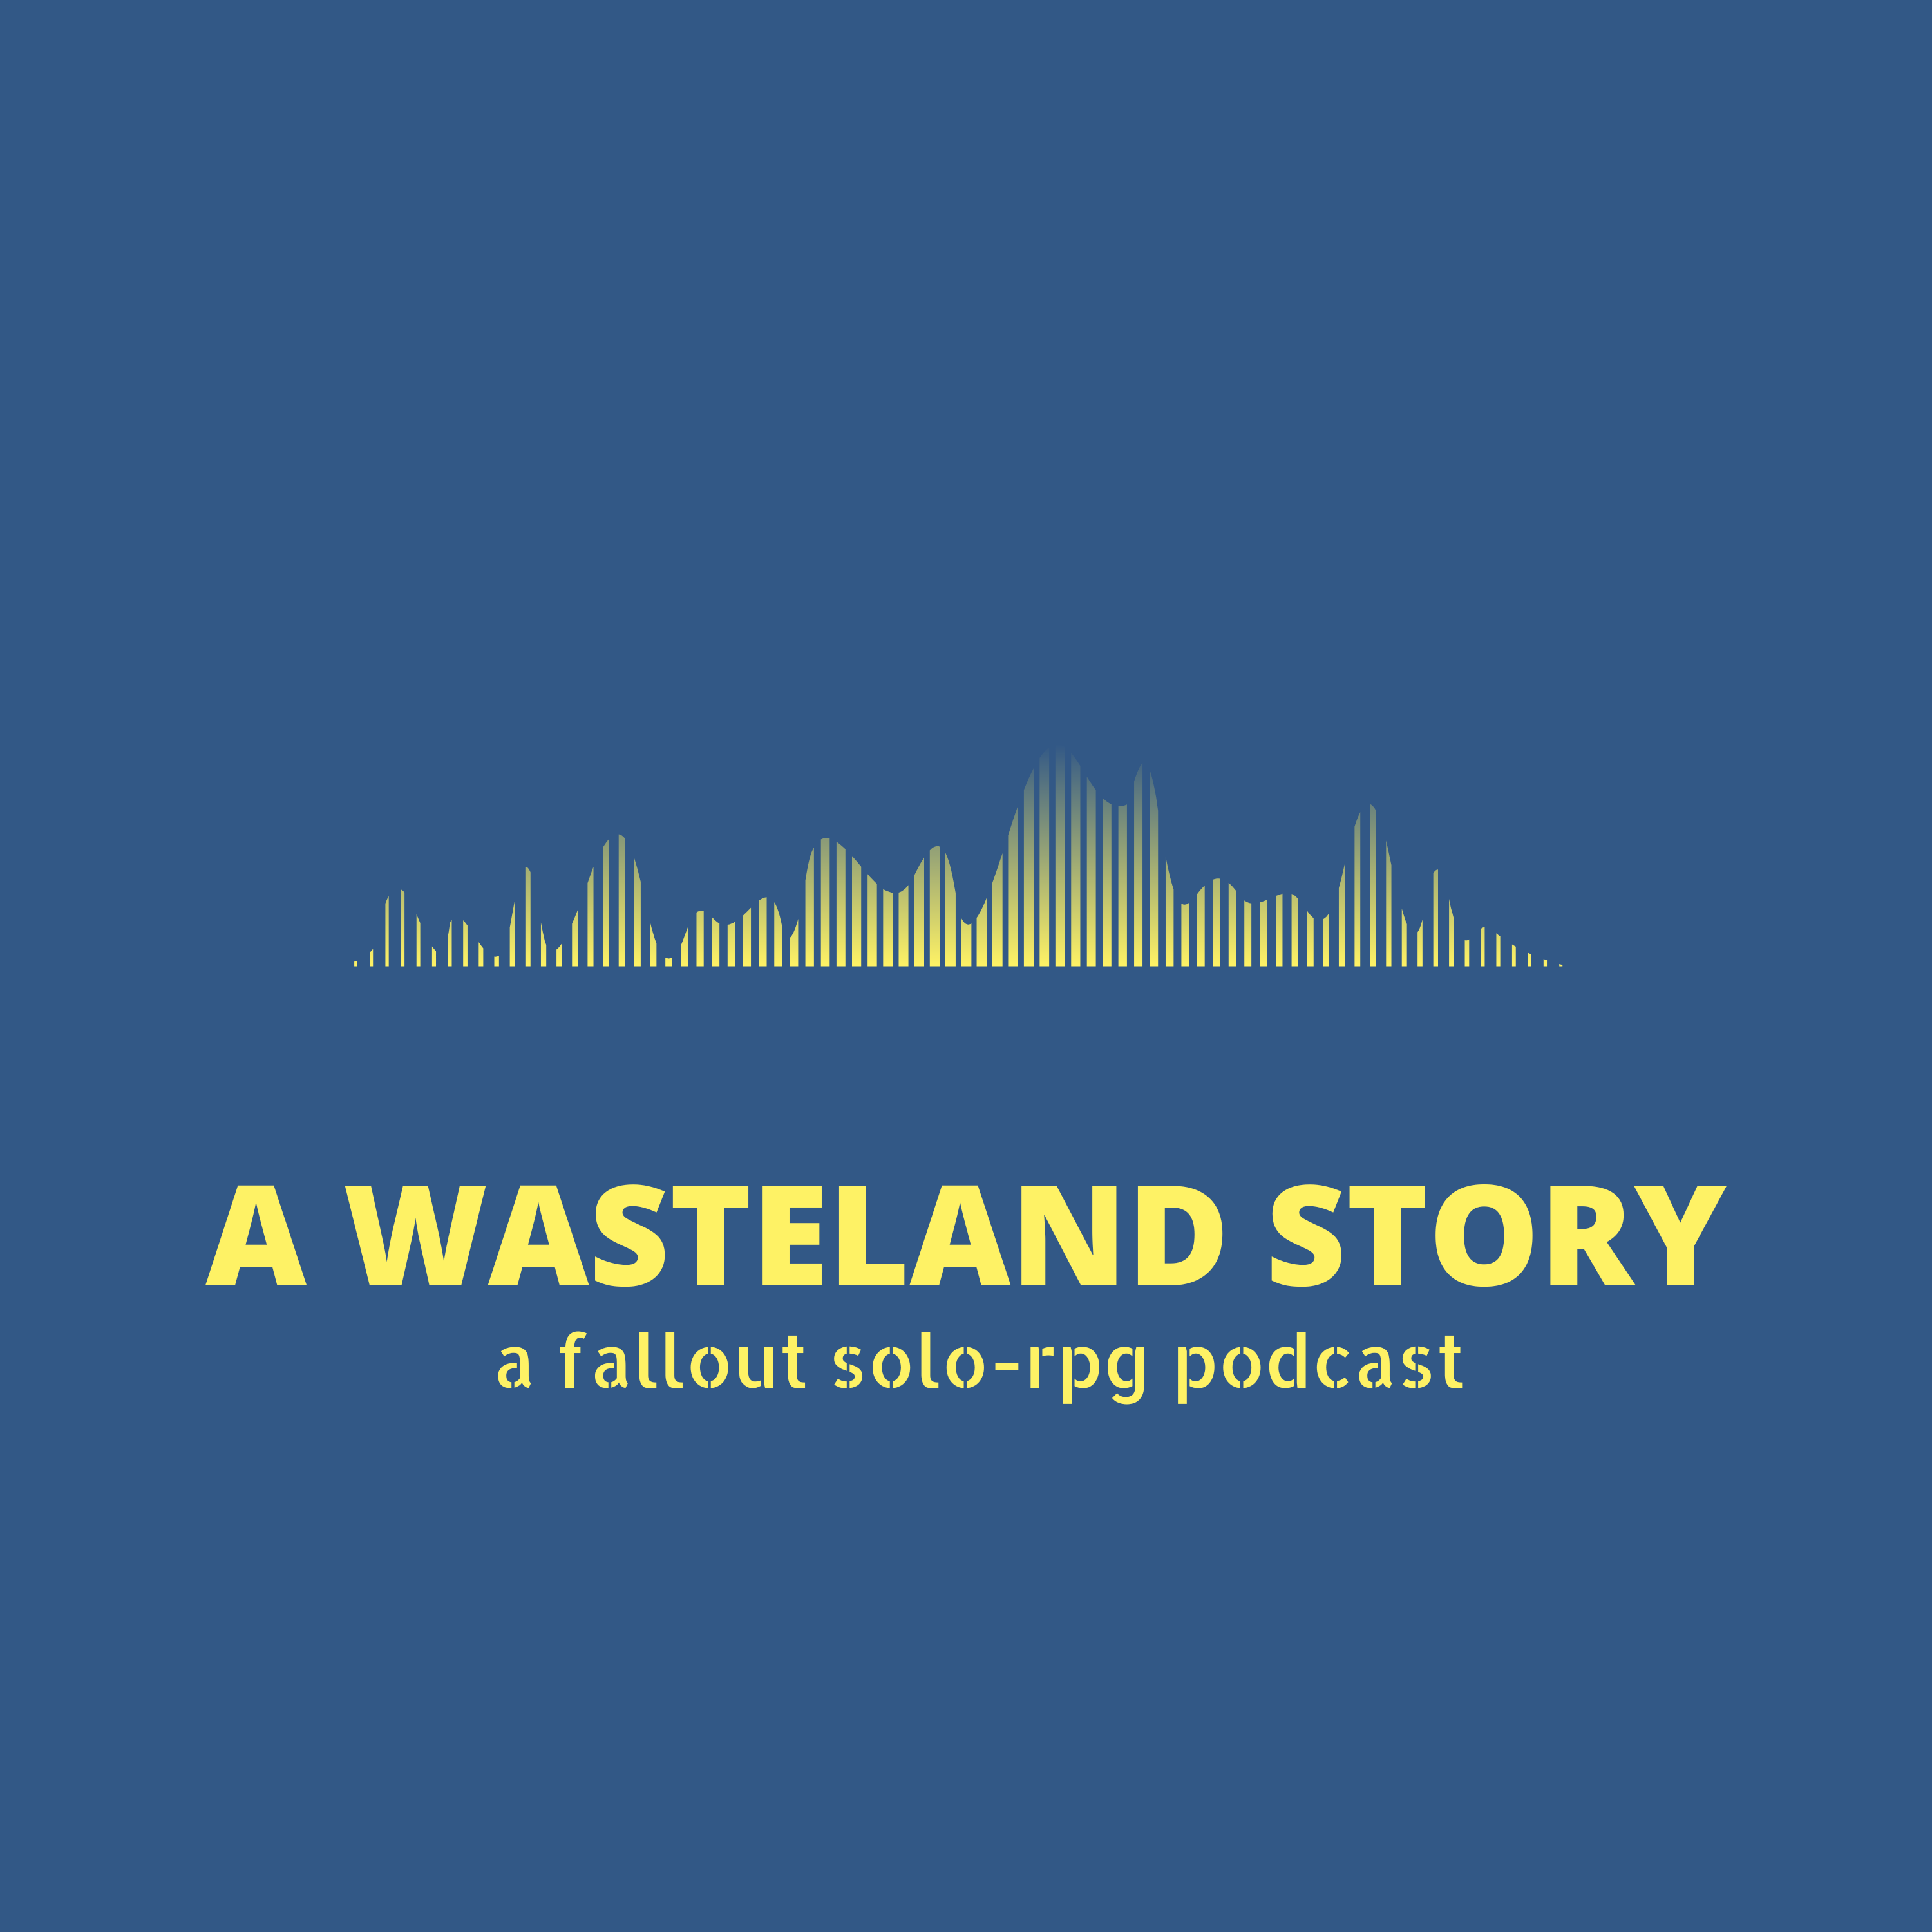 A Wasteland Story - a fallout solo-rpg podcast